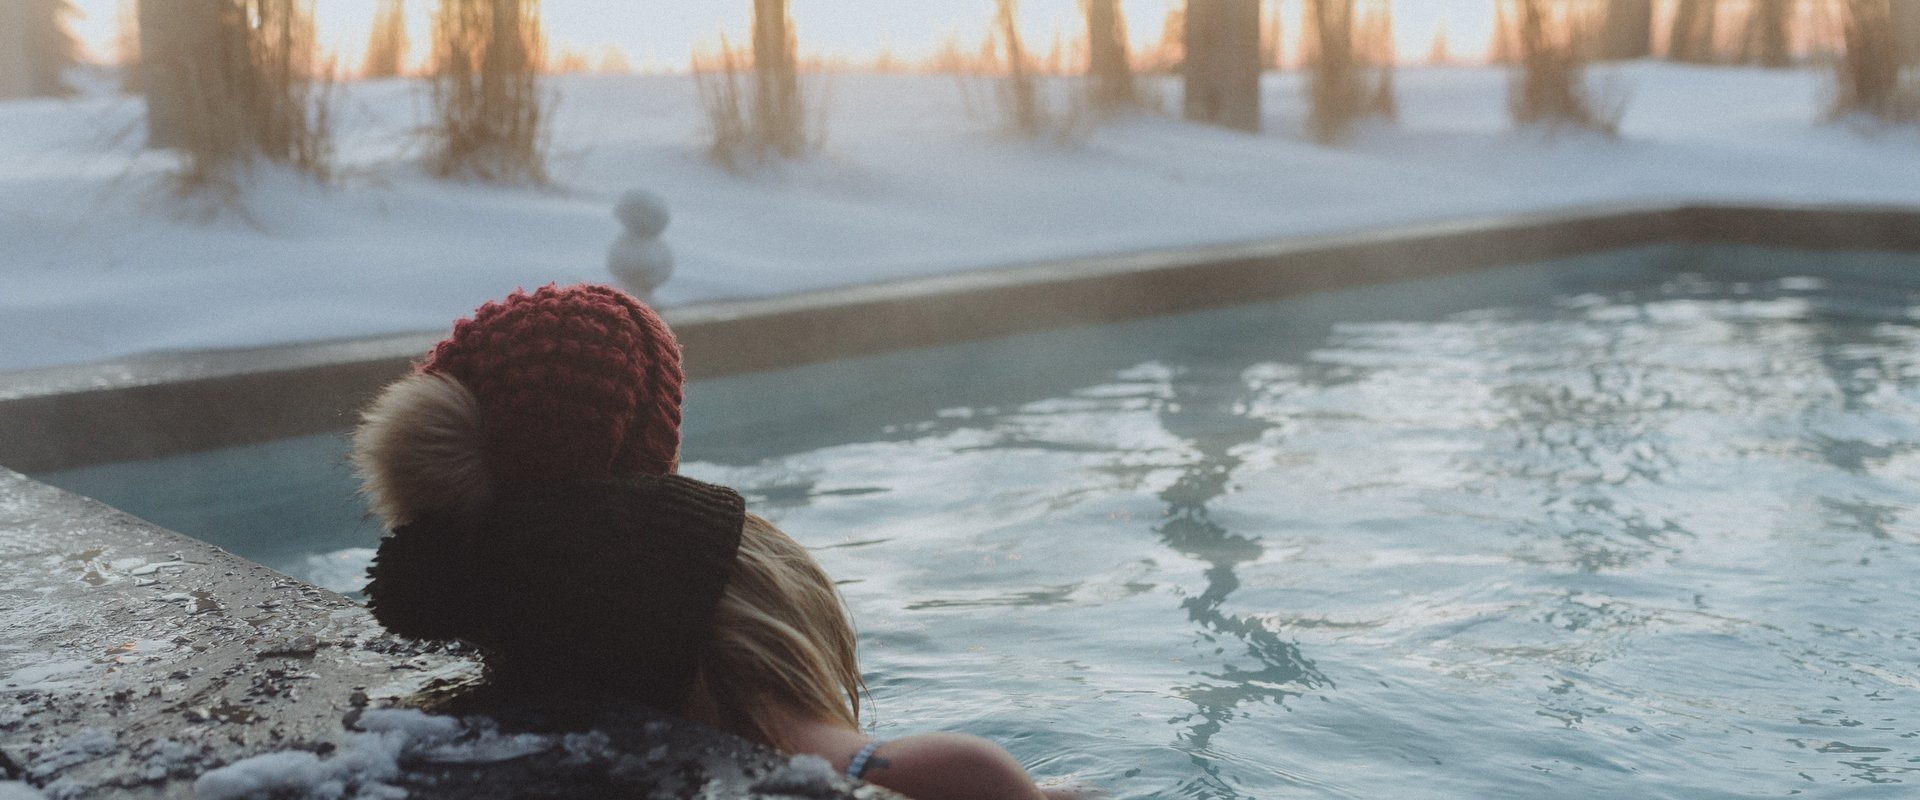 Two people wearing winter hats watching a sunset in a hot tub on a snowy evening 